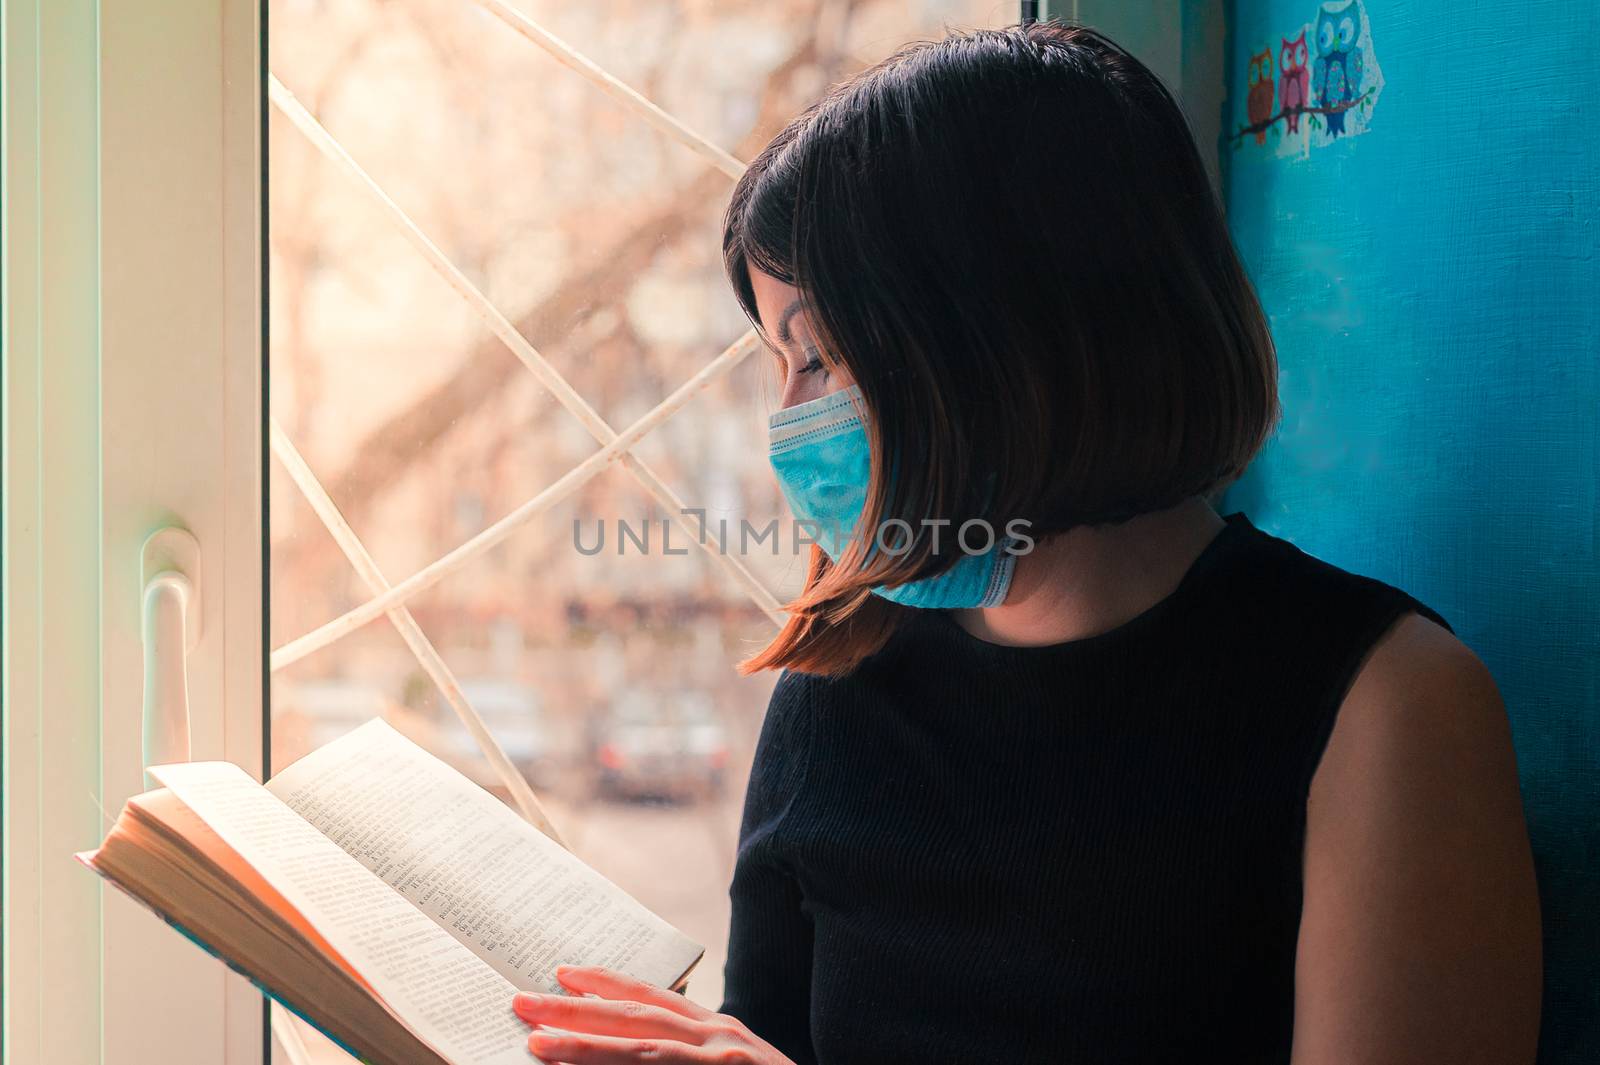 a dark-haired girl in a black dress sits in a surgical mask at the hospital window and reads a book